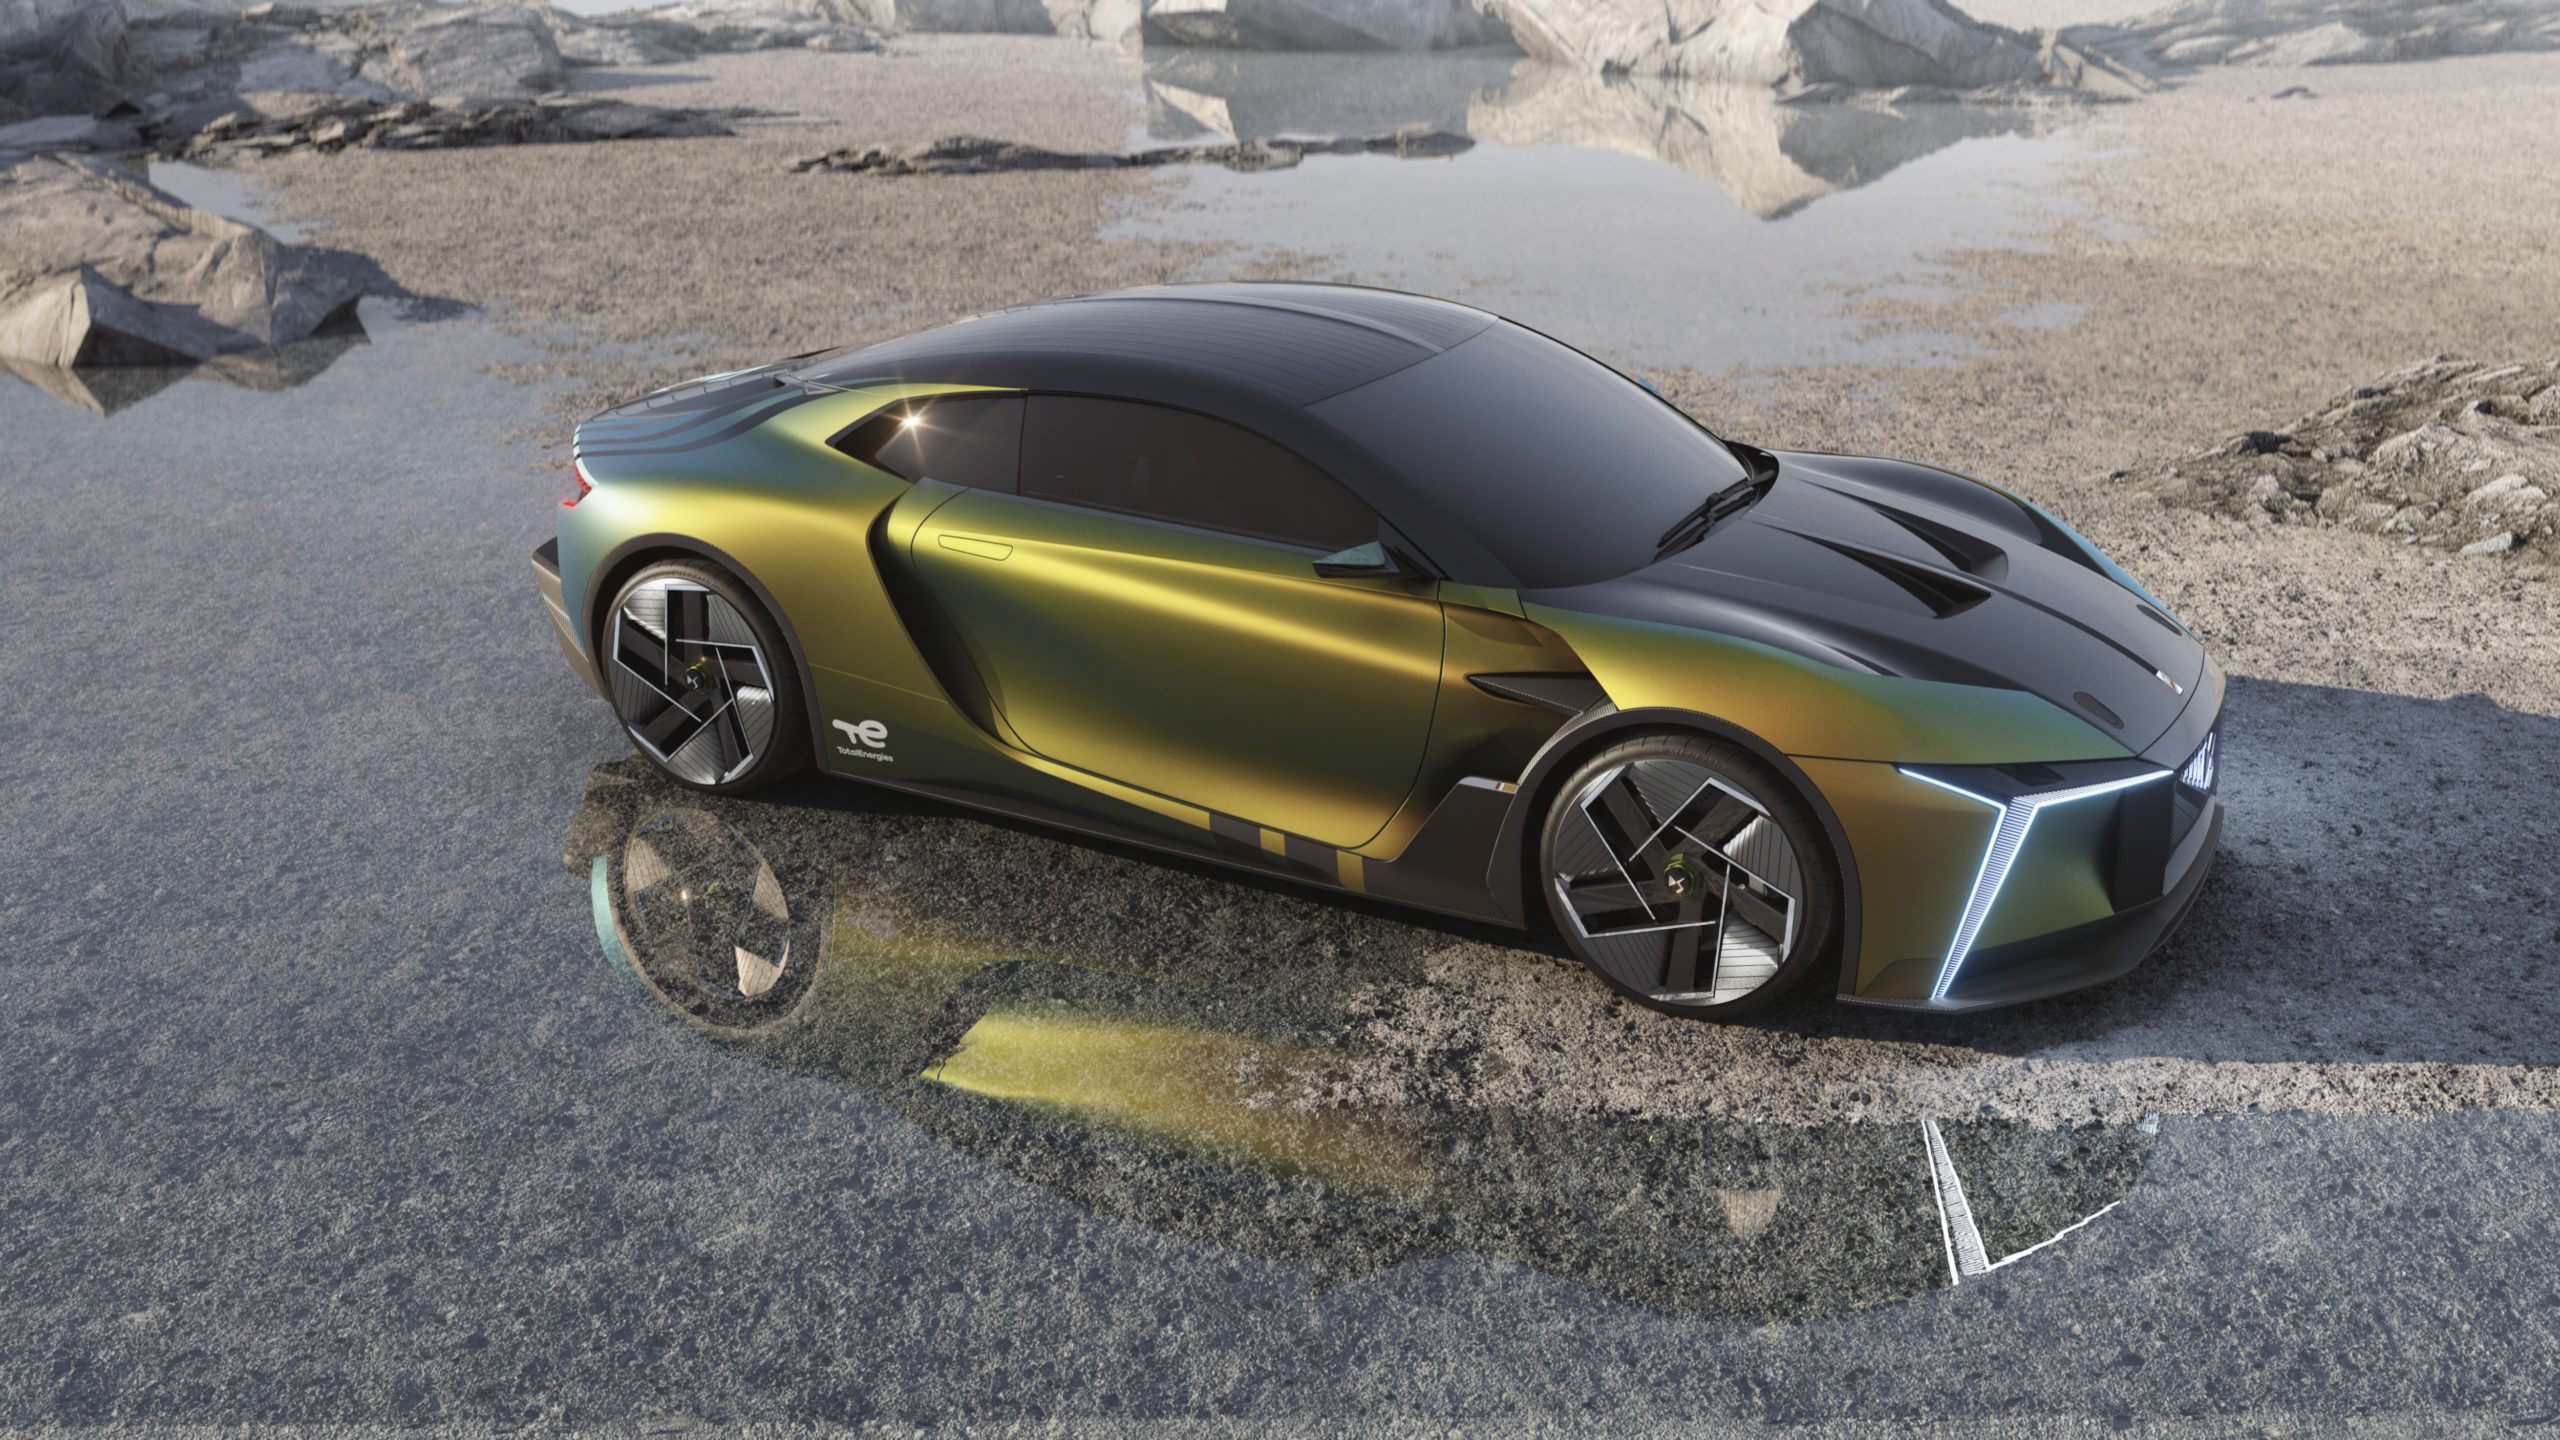 DS tests its future with E-Tense Performance